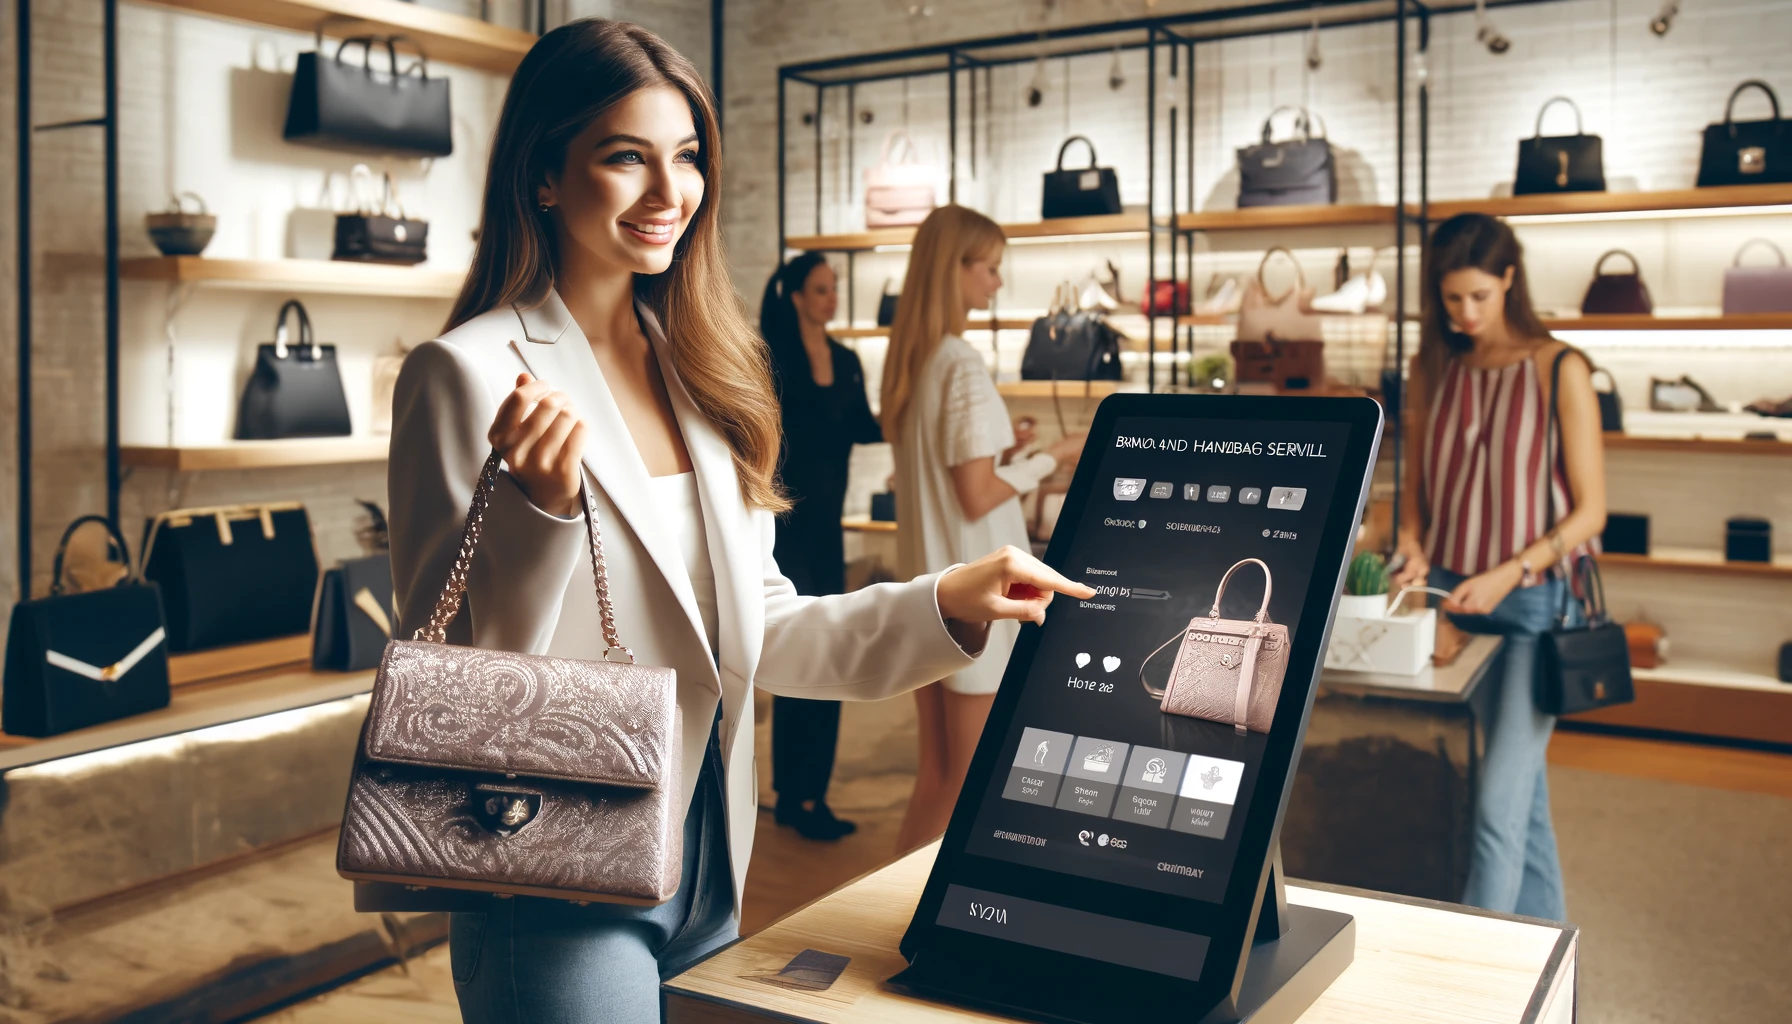 A savvy customer successfully using a brand handbag rental service. The scene shows a well-dressed young woman in a chic boutique, comparing handbag options on a digital kiosk that displays various subscription plans and customer reviews. She's holding a stylish bag and appears pleased with her choice. The boutique is modern and elegant, with an array of luxury handbags artistically displayed. Other satisfied customers can be seen in the background, enhancing the positive atmosphere of the store.